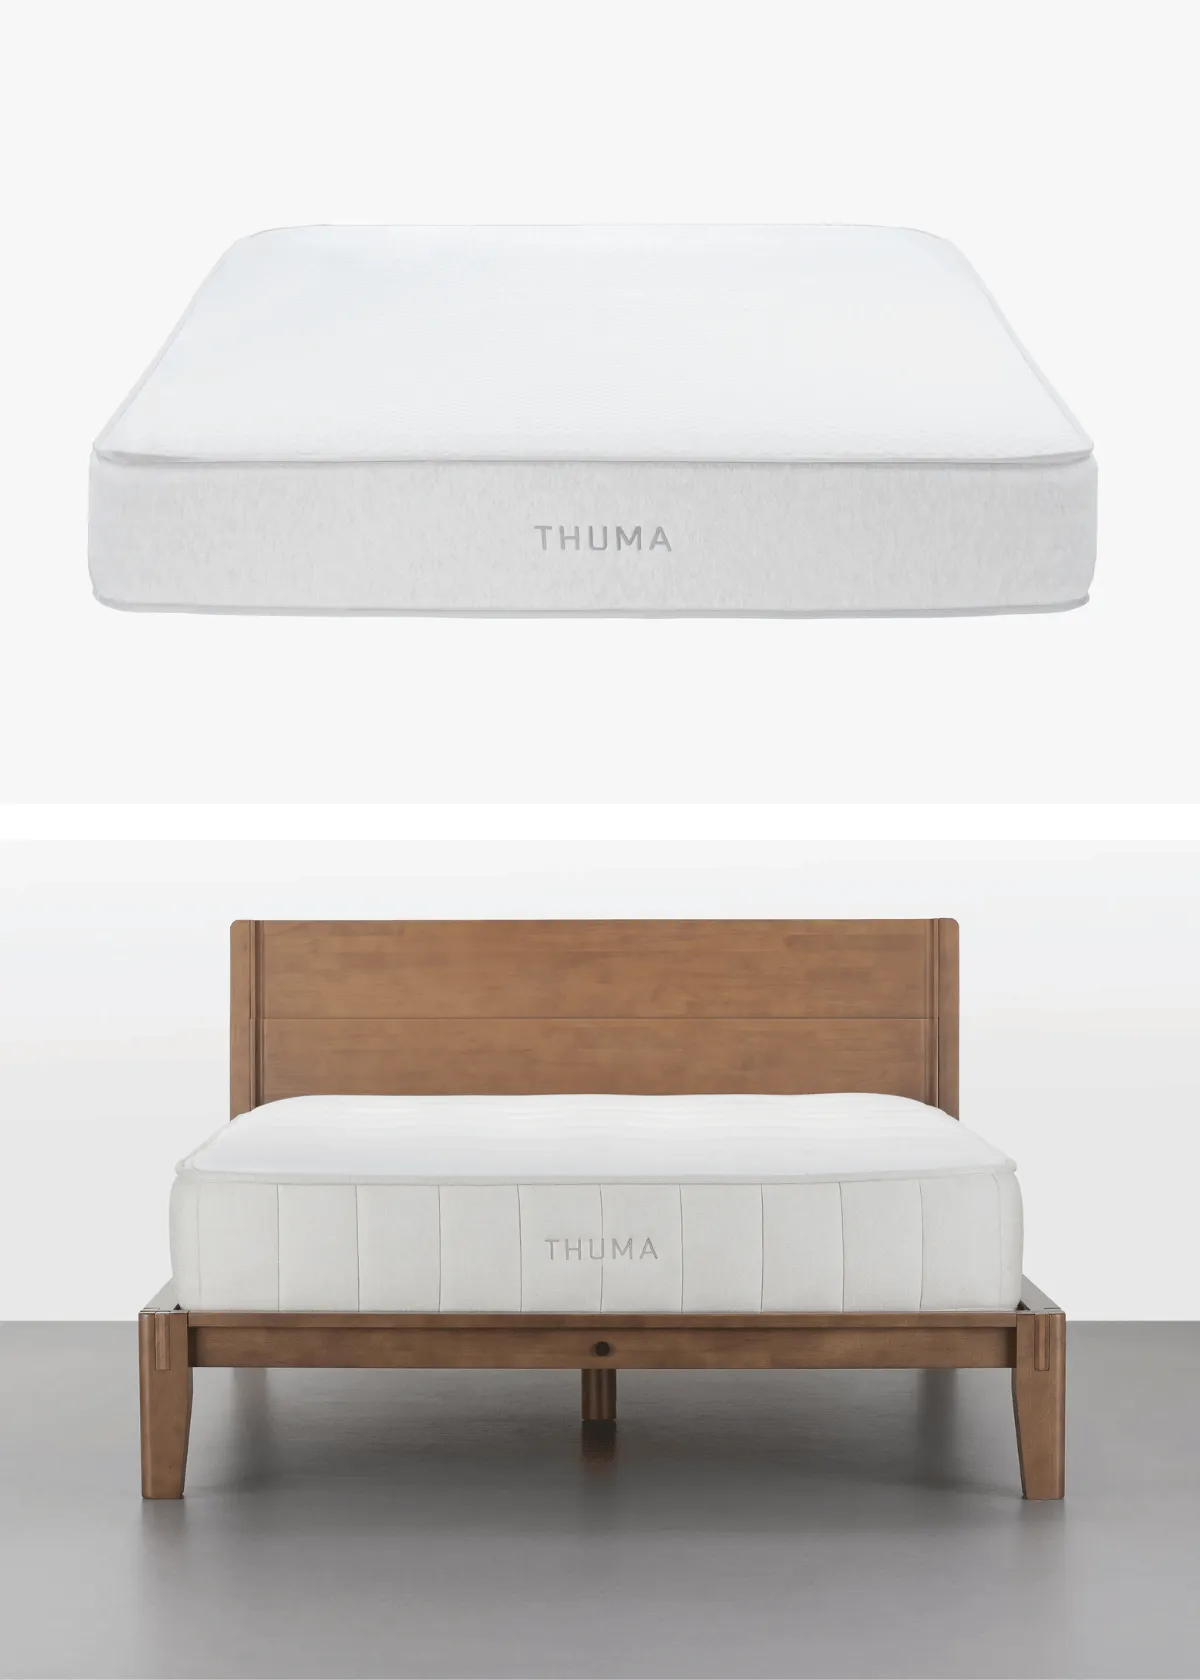 "Is the Thuma Mattress Worth the Hype and Your Investment?"